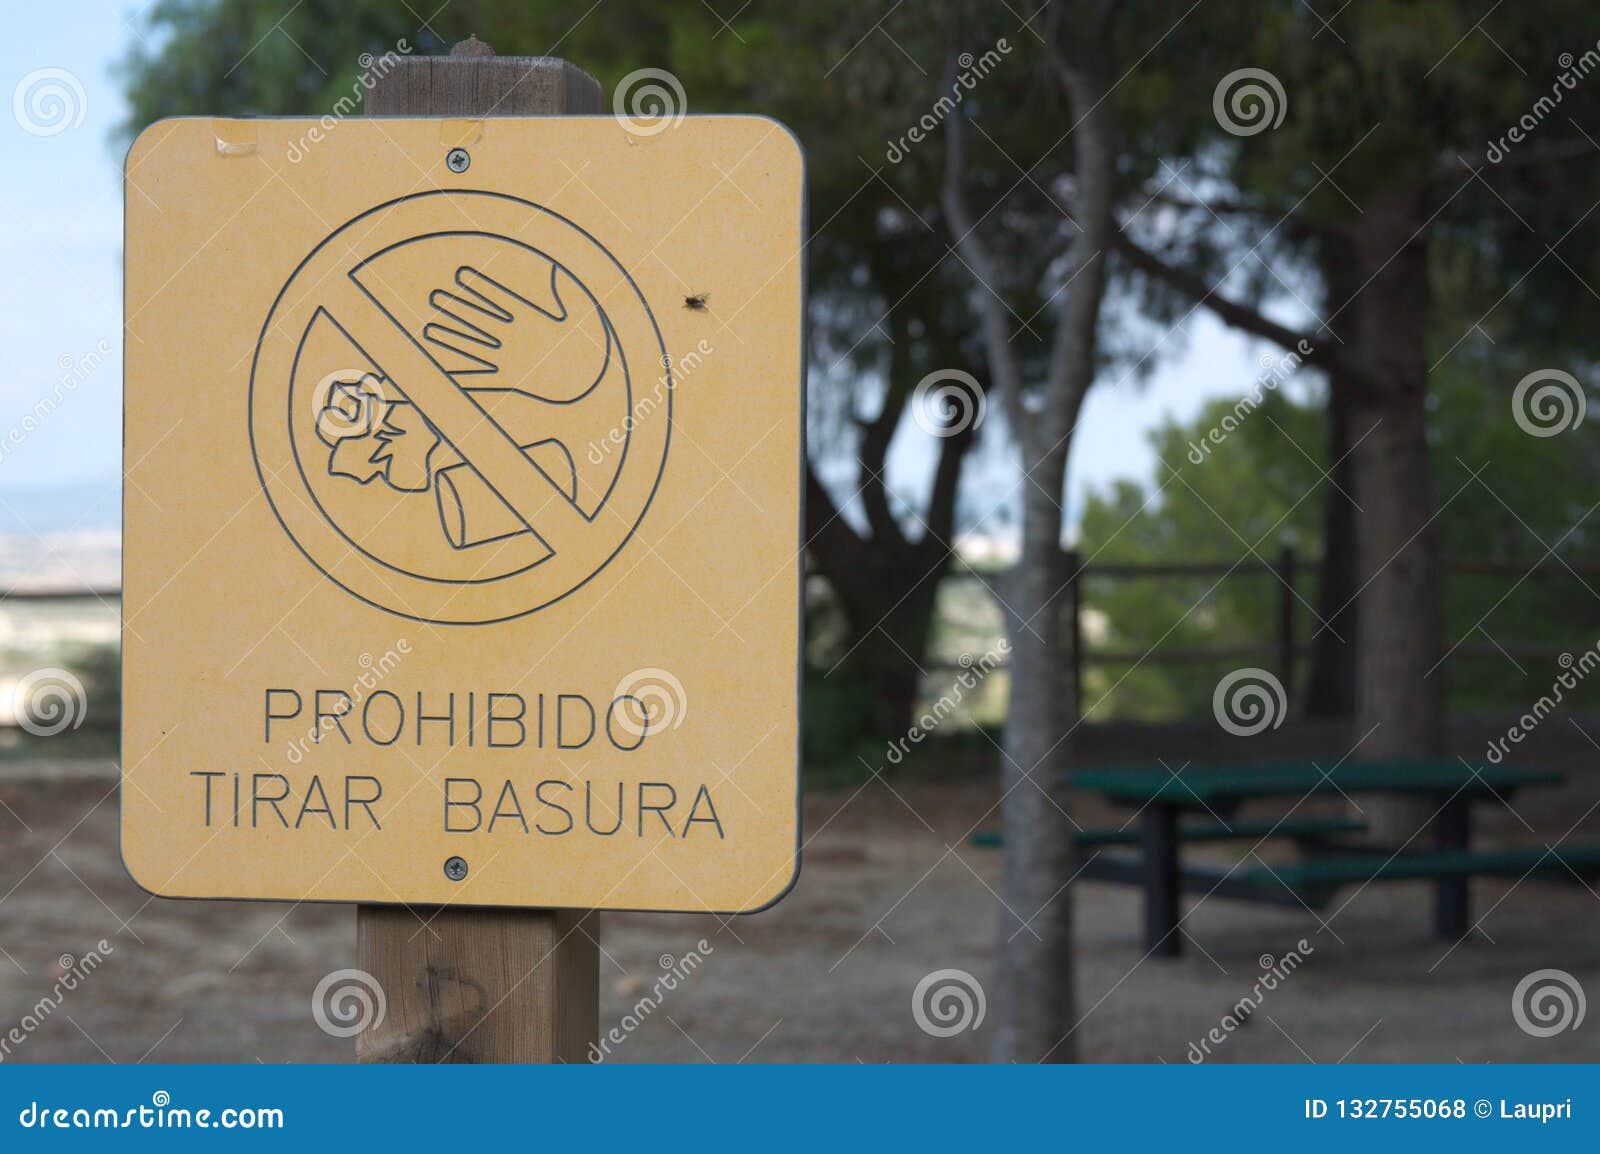 notice of prohibition of littering in the forest